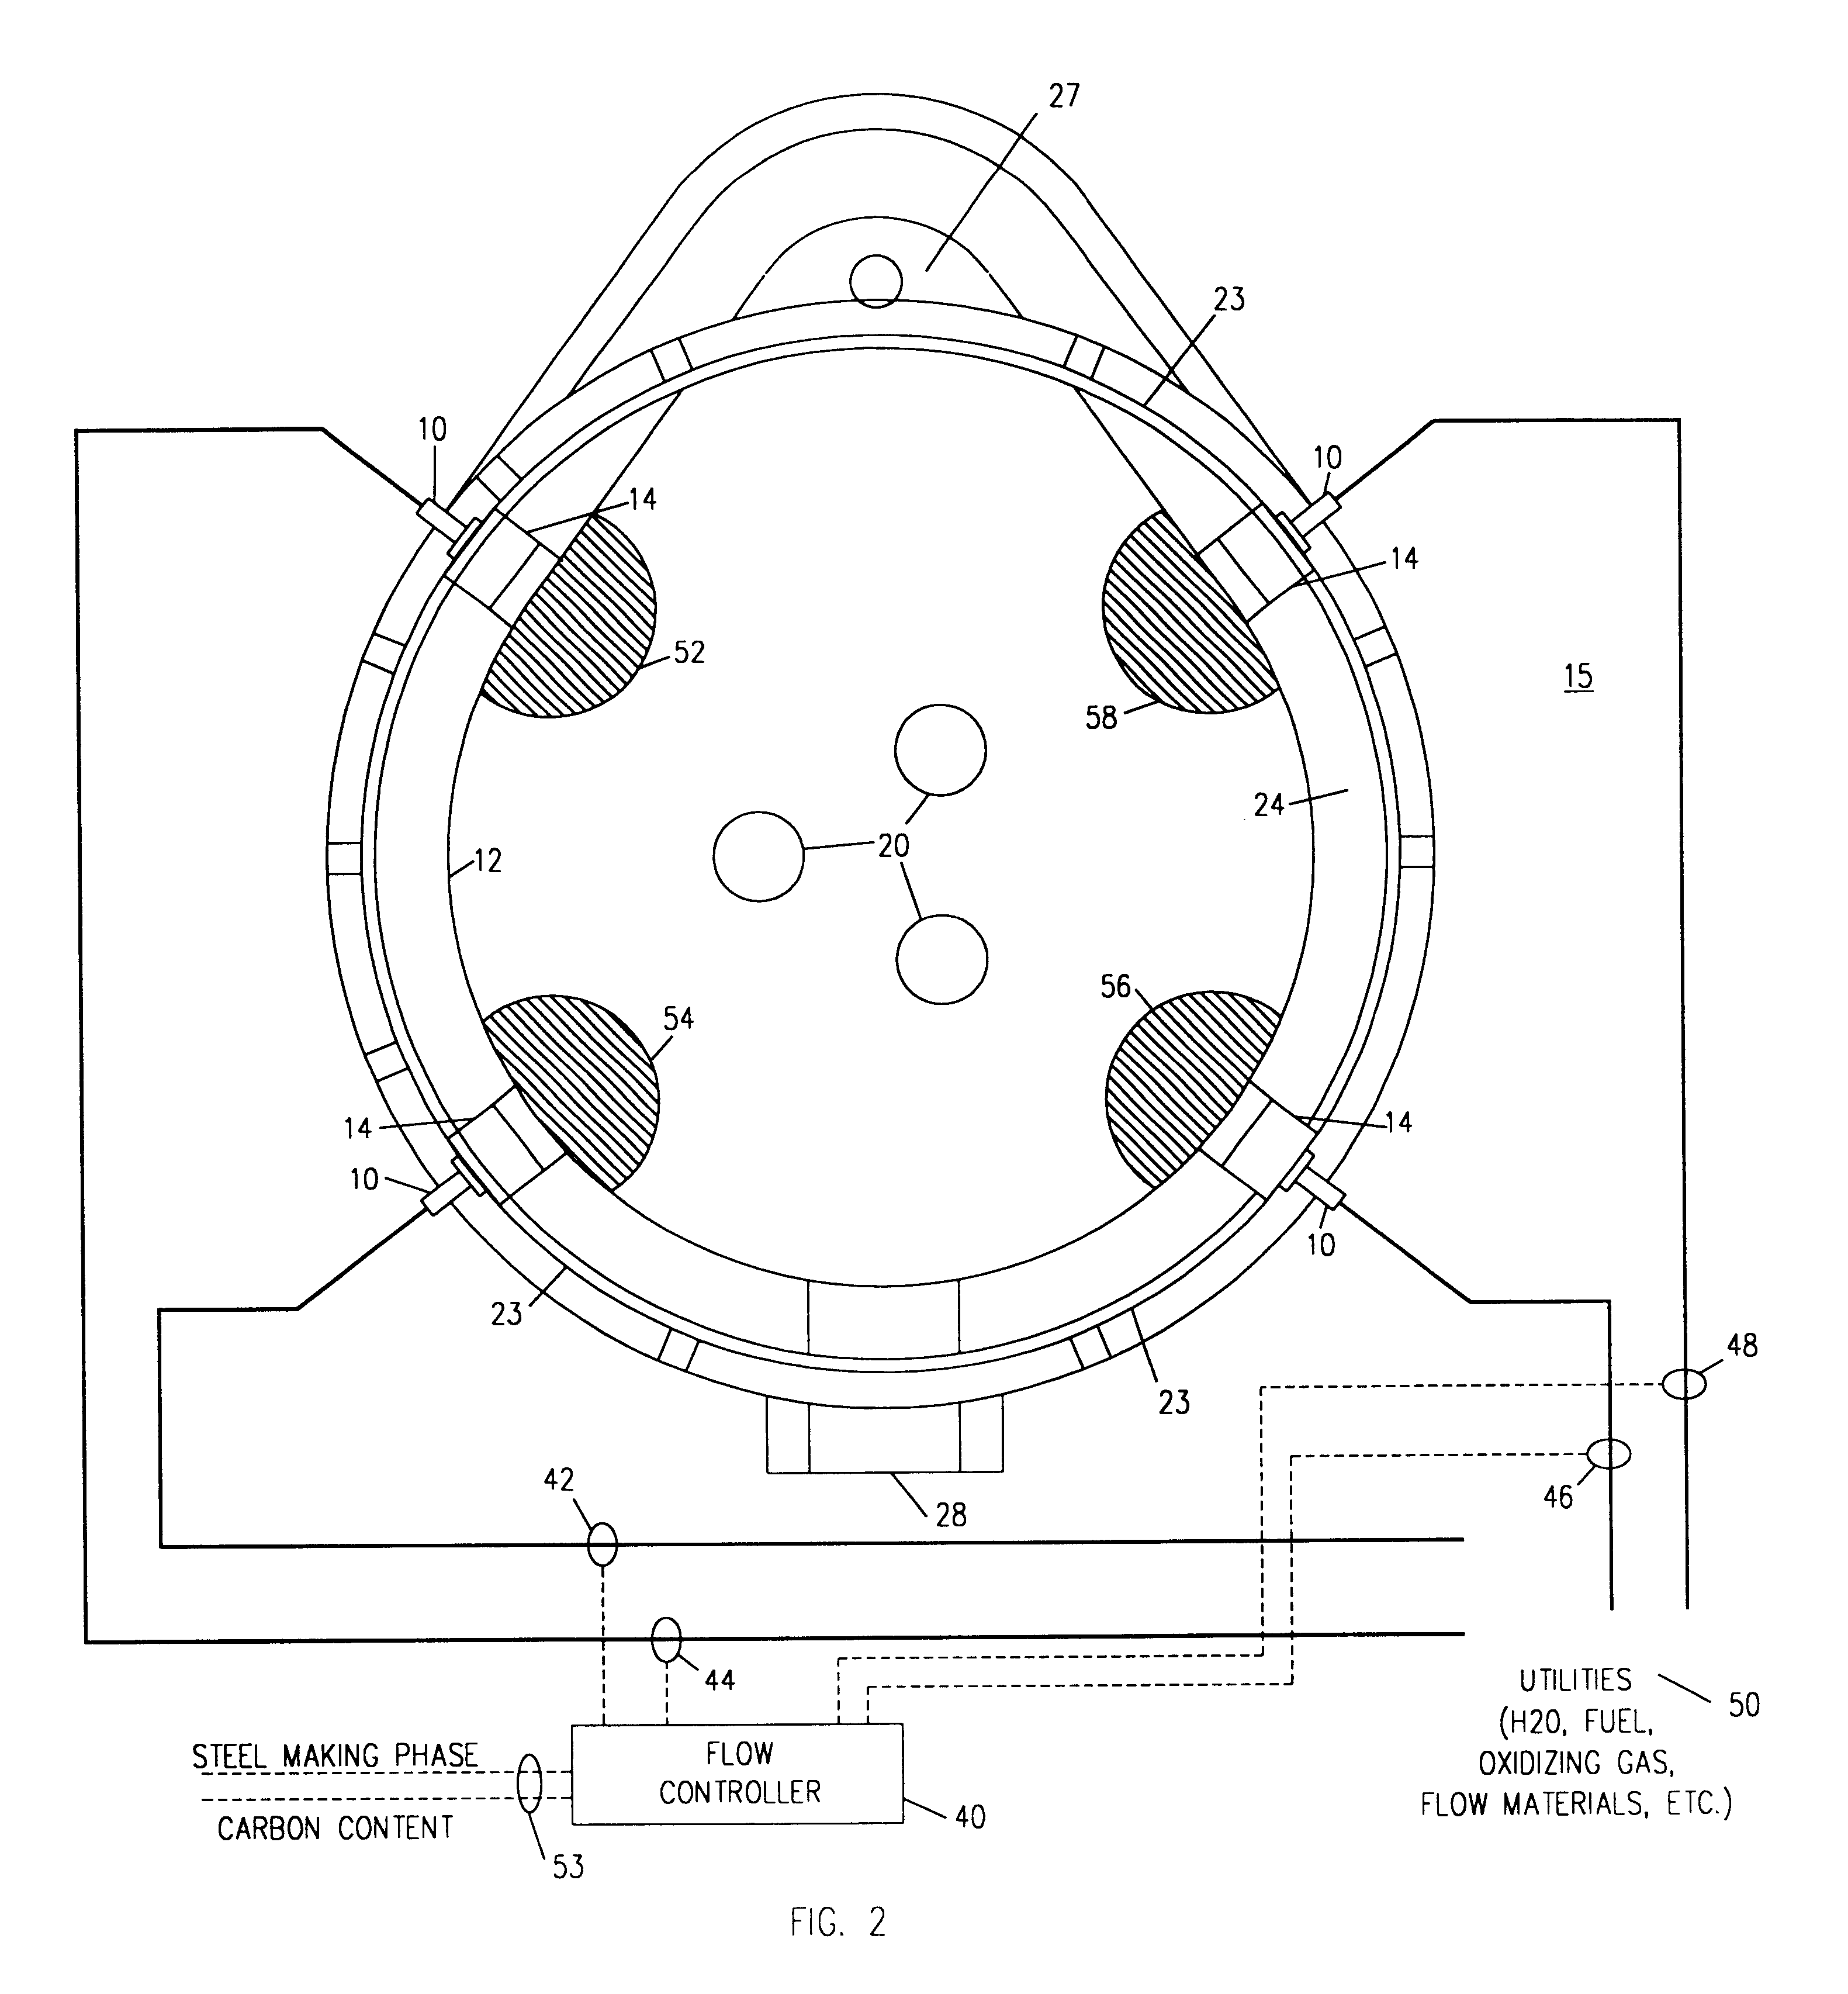 Method for melting and decarburization of iron carbon melts